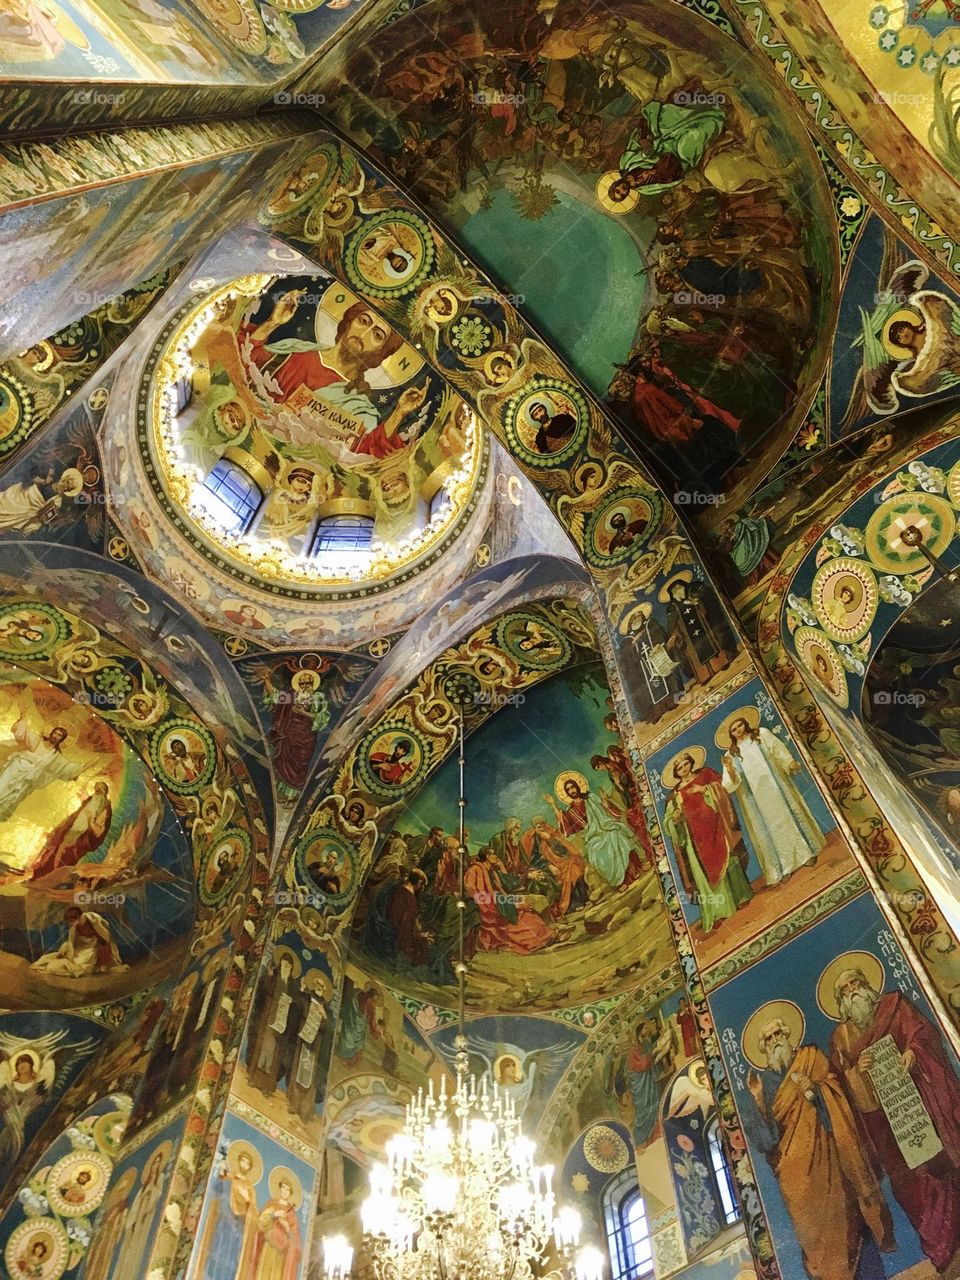 The vibrant mosaic ceiling of the Church of the Resurrection, Saint Petersburg, Russia 